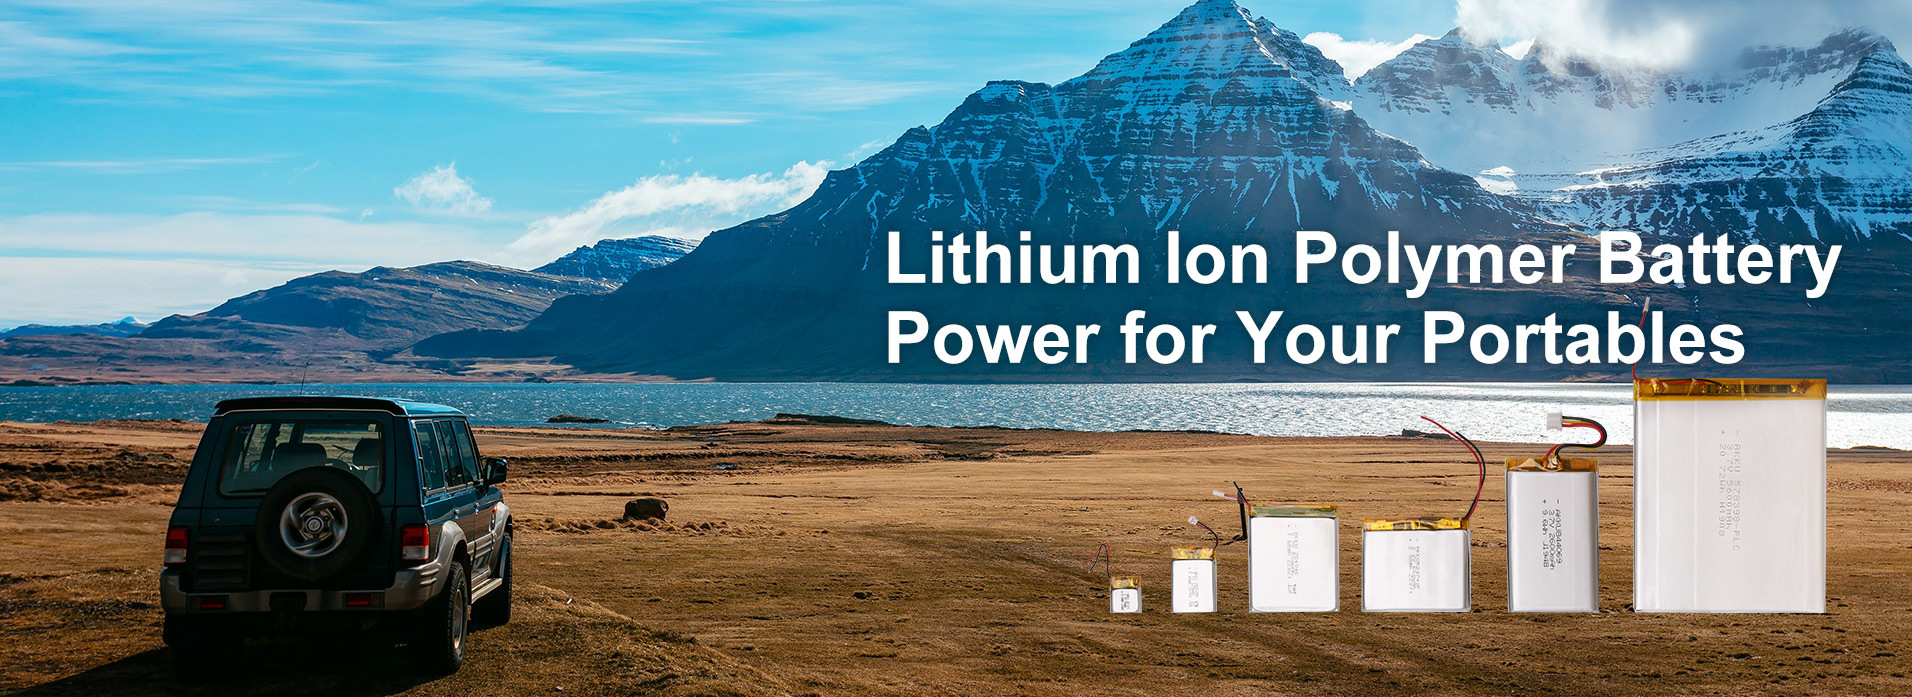 Lithium lon Polymer Battery Power for Your Portables